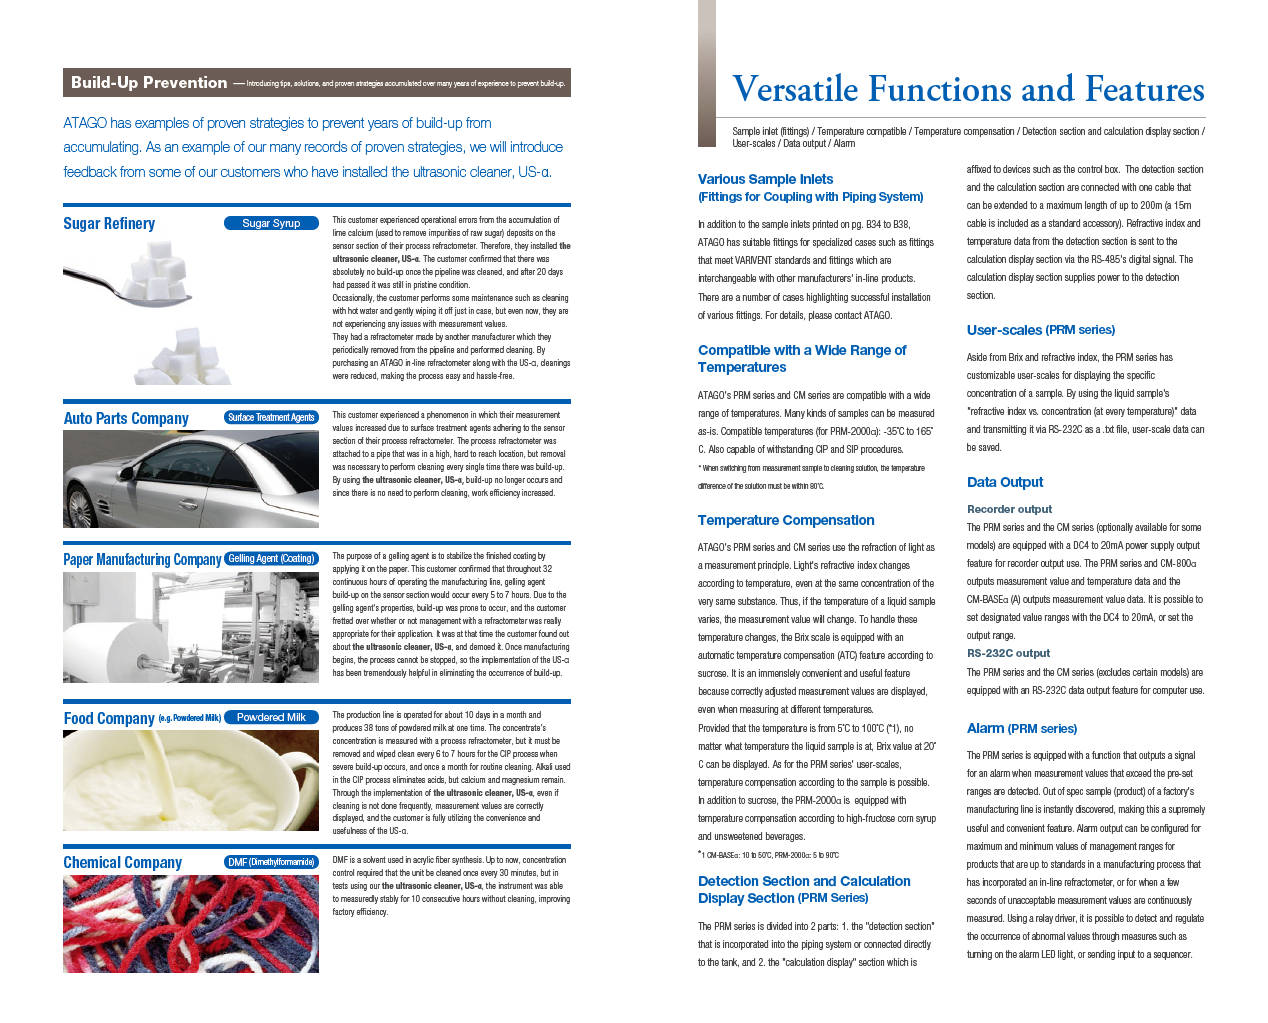 Build-Up Prevention / Versatile Functions and Features